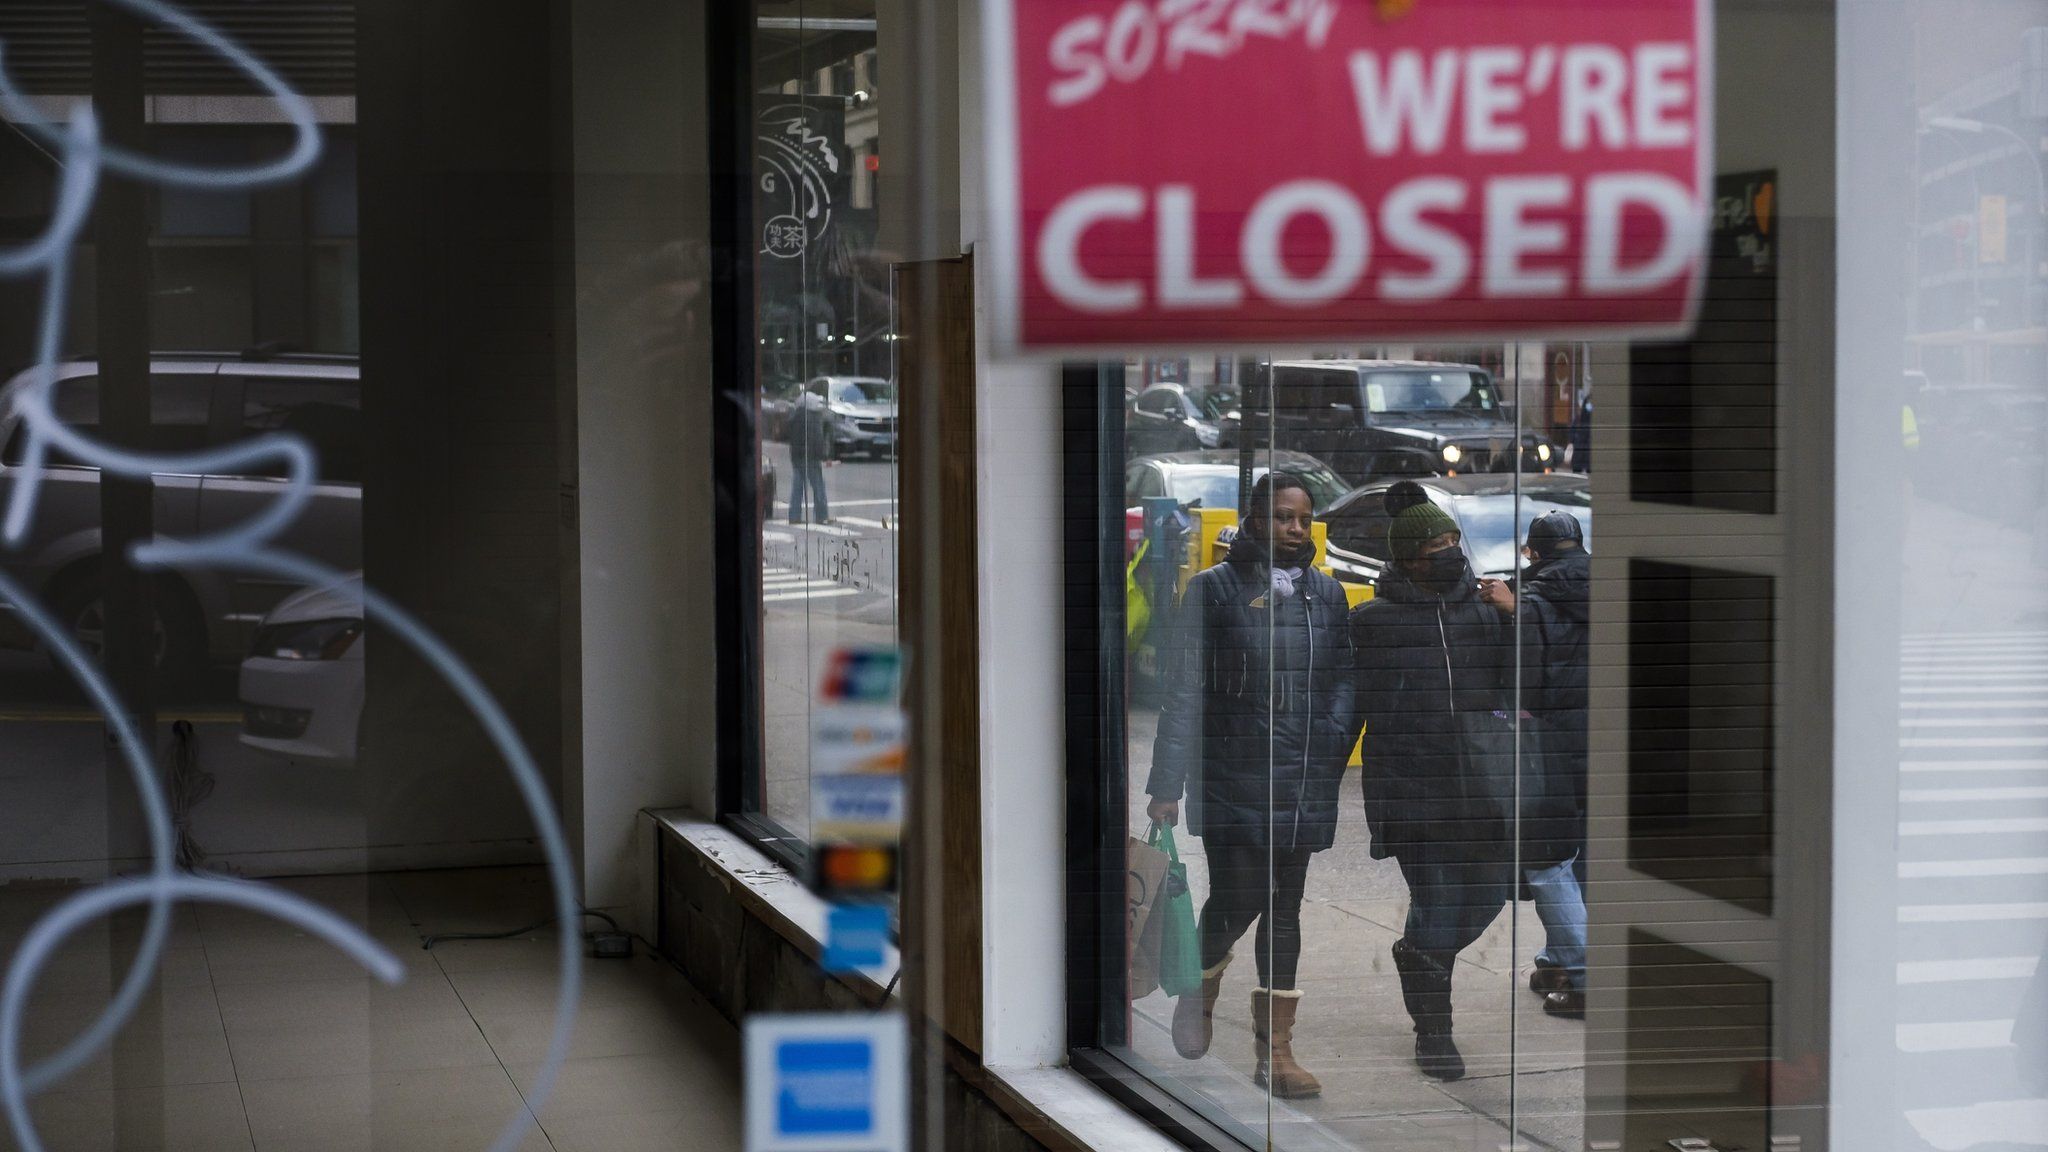 Pedestrians walk past a closed store in New York, New York, USA, on 08 January 2021. The United Statesâ€™ Bureau of Labor Statistics released data today showing that the US economy lost 140,000 jobs in December and that the unemployment rate is at 6.7 percent as businesses continue to struggle with the economic impact of the coronavirus pandemic